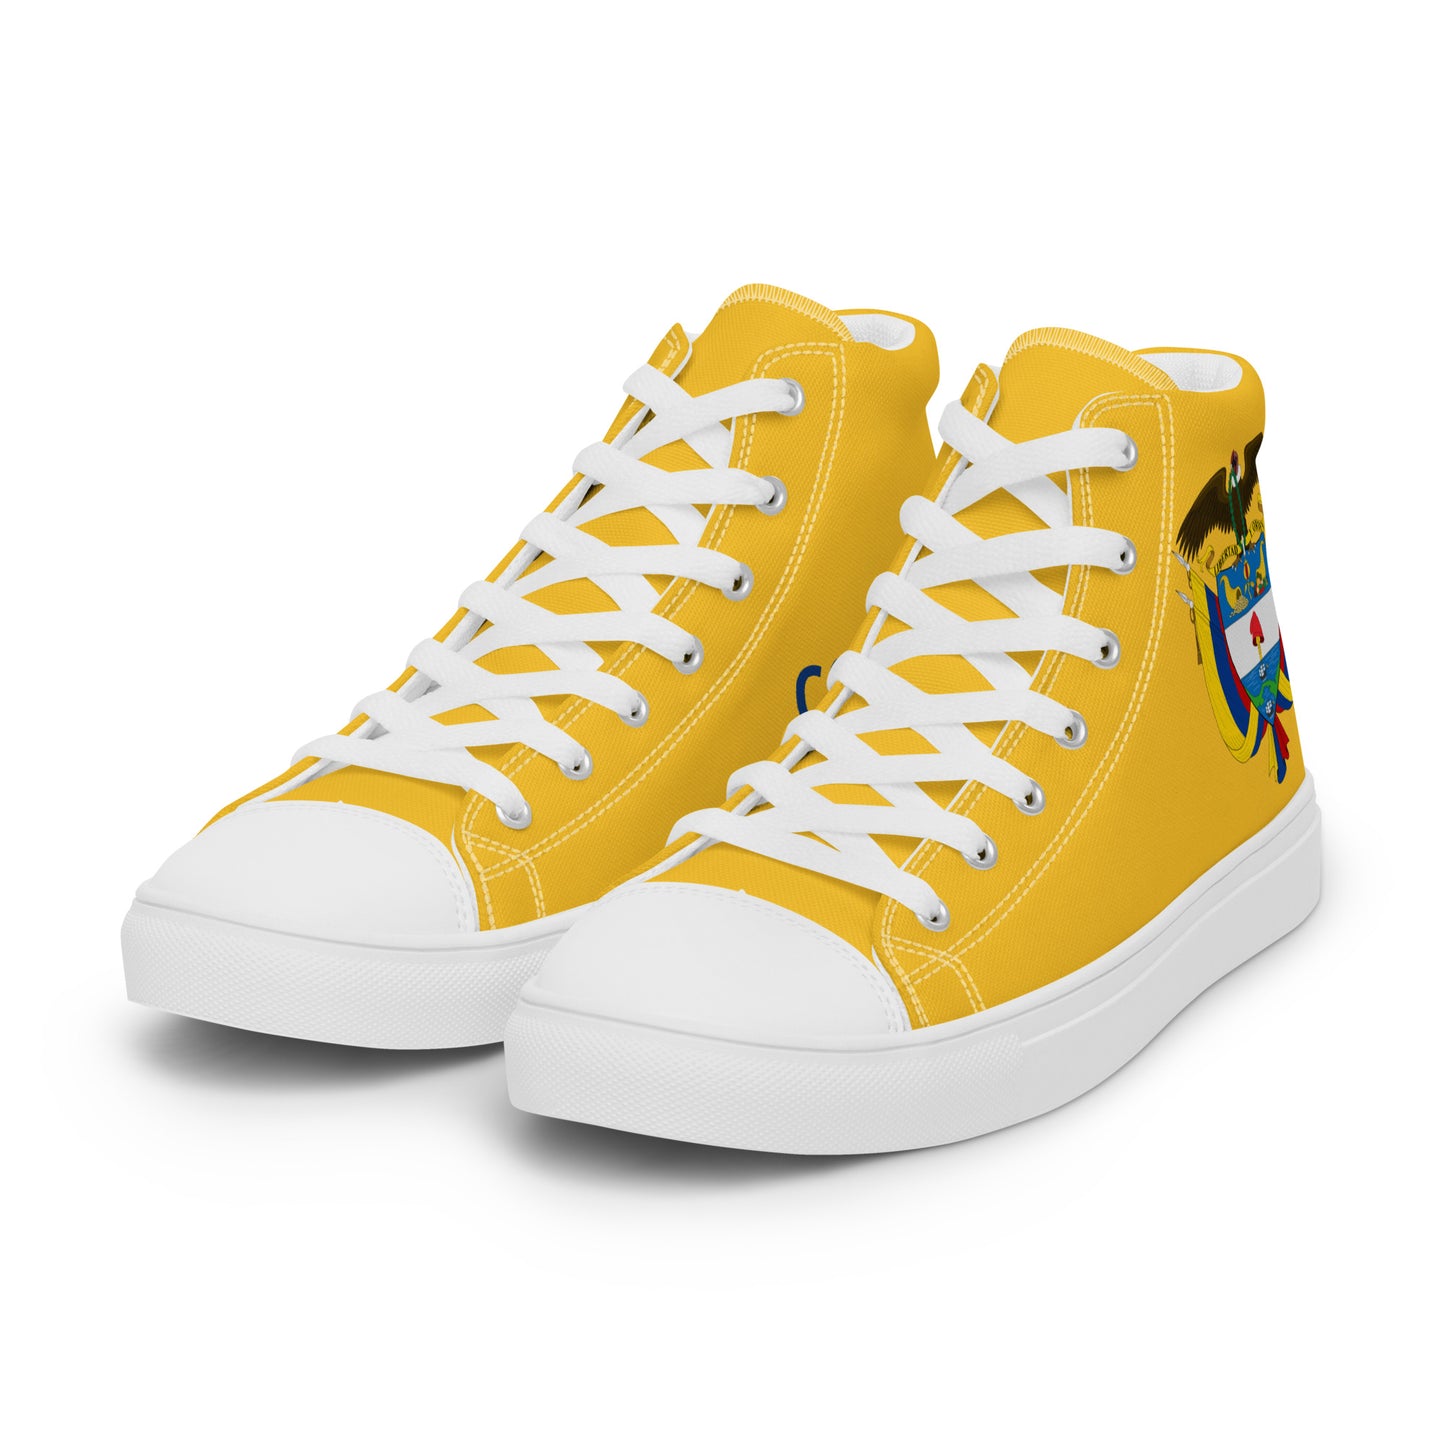 Colombia - Women - Yellow - High top shoes